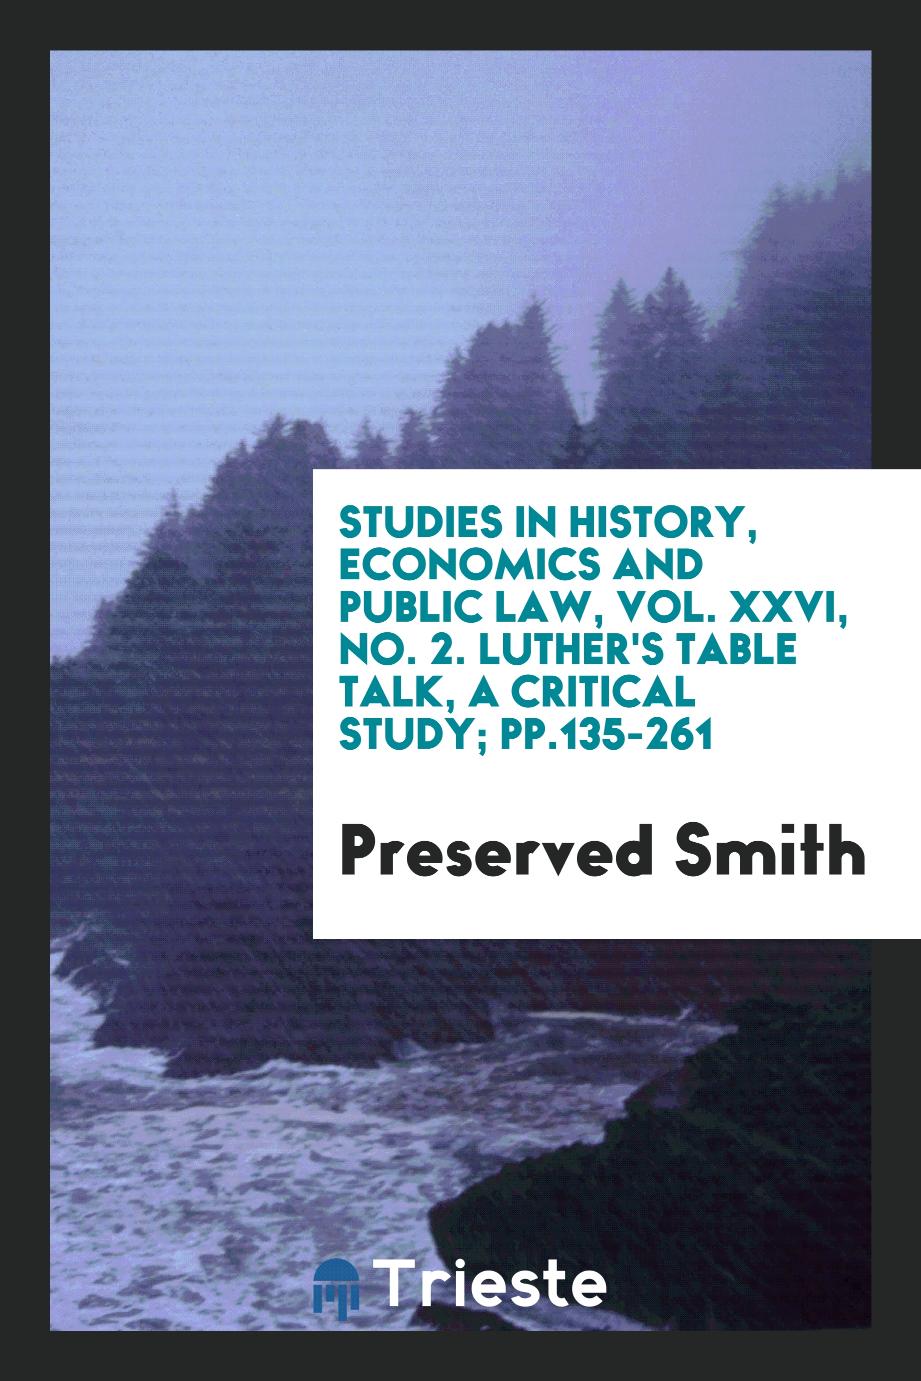 Studies in History, Economics and Public Law, Vol. XXVI, No. 2. Luther's Table talk, a critical study; pp.135-261